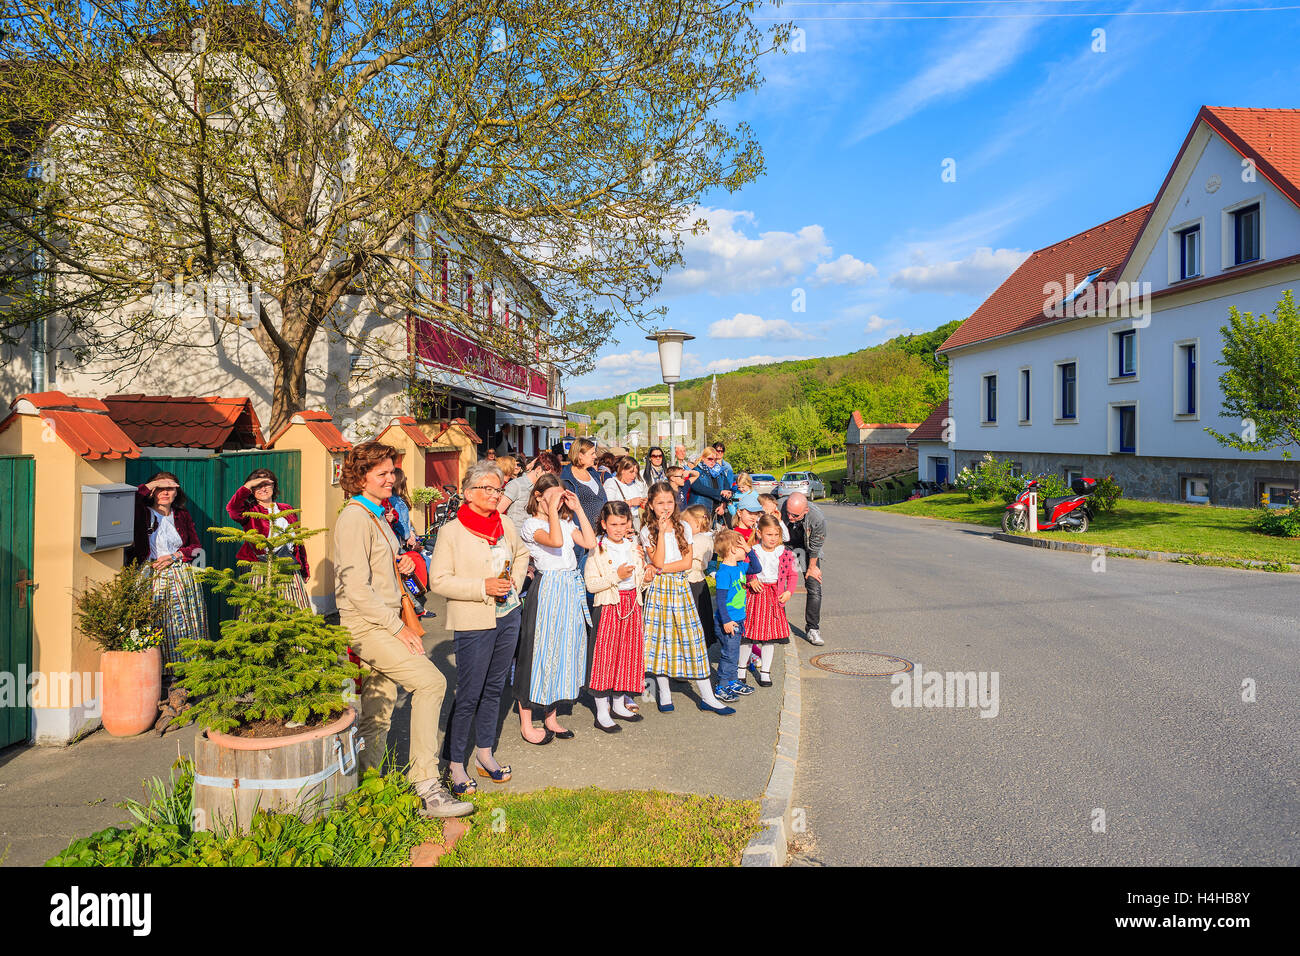 GLASING VILLAGE, AUSTRIA - APR 30, 2016: people watching dancing on street during May Tree celebration. In Germany and Austria t Stock Photo